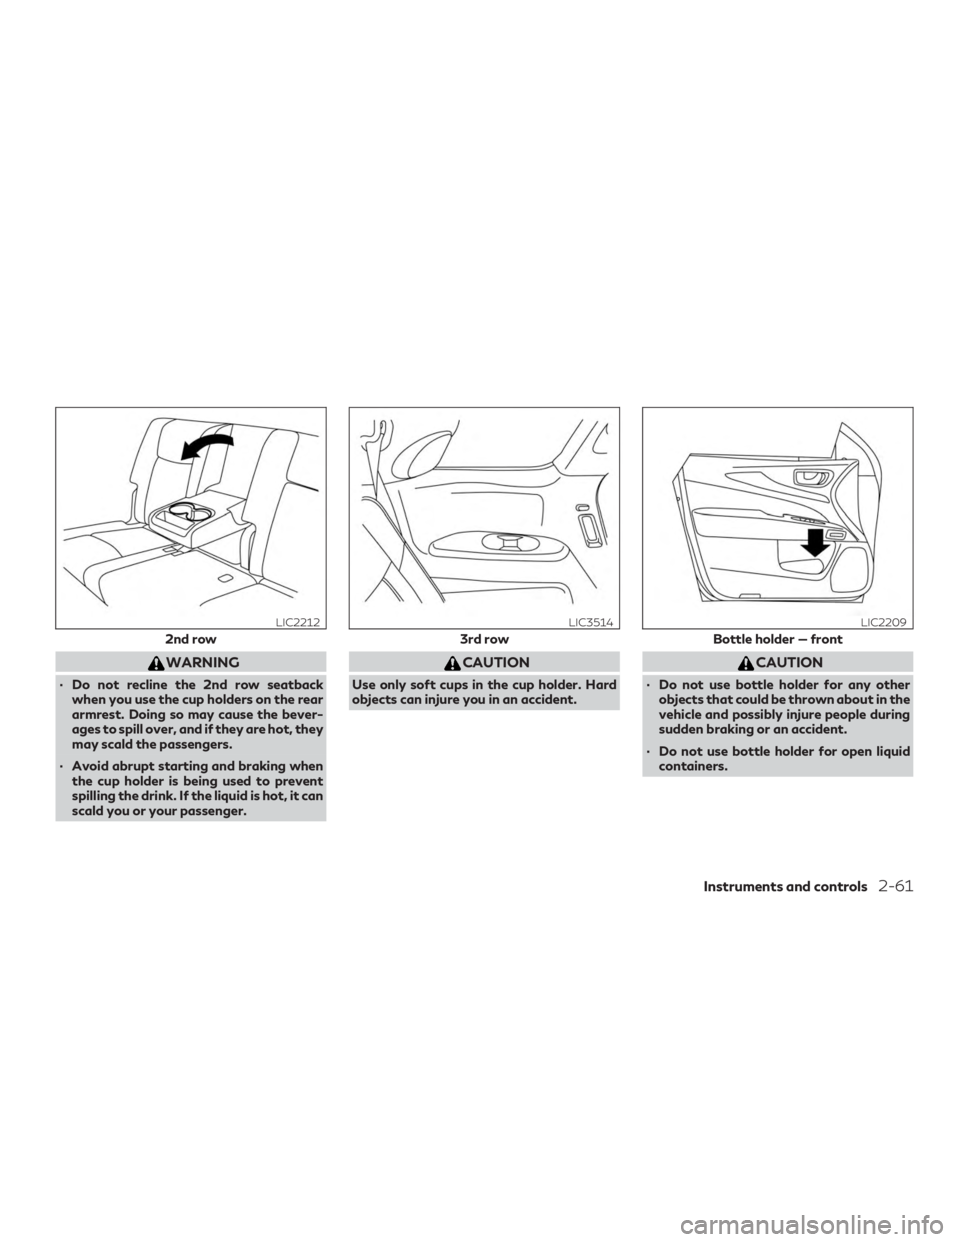 INFINITI QX60 2018 User Guide WARNING
∙ Do not recline the 2nd row seatbackwhen you use the cup holders on the rear
armrest. Doing so may cause the bever-
ages to spill over, and if they are hot, they
may scald the passengers.
�